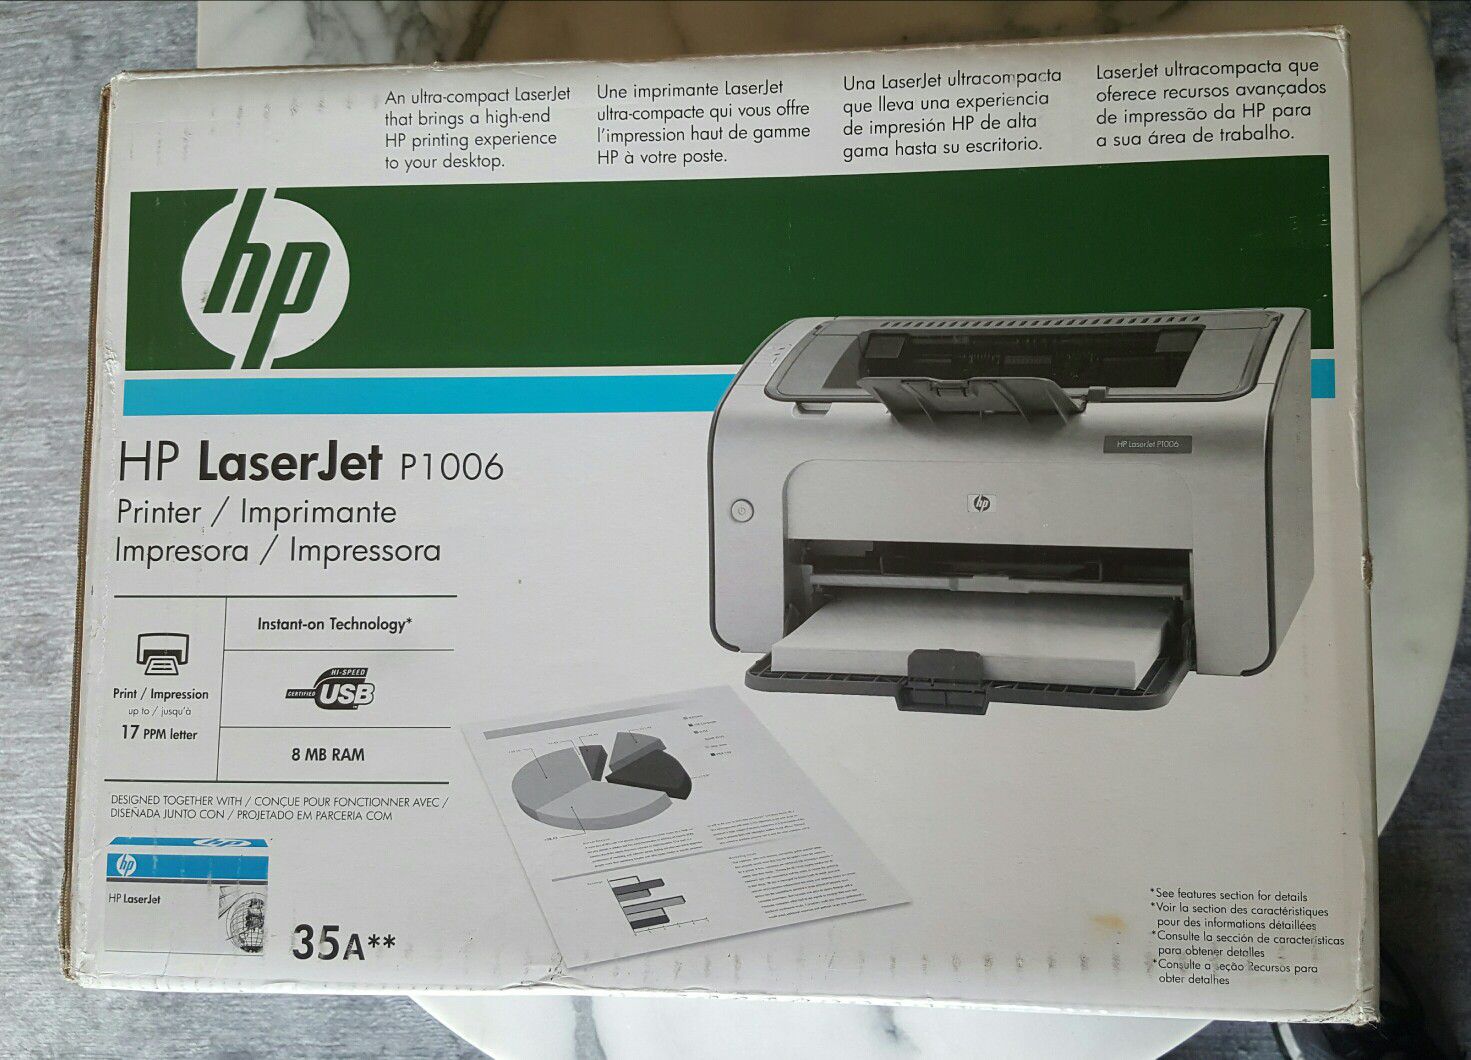 can i make copies with my laser jet hp p1006 printer